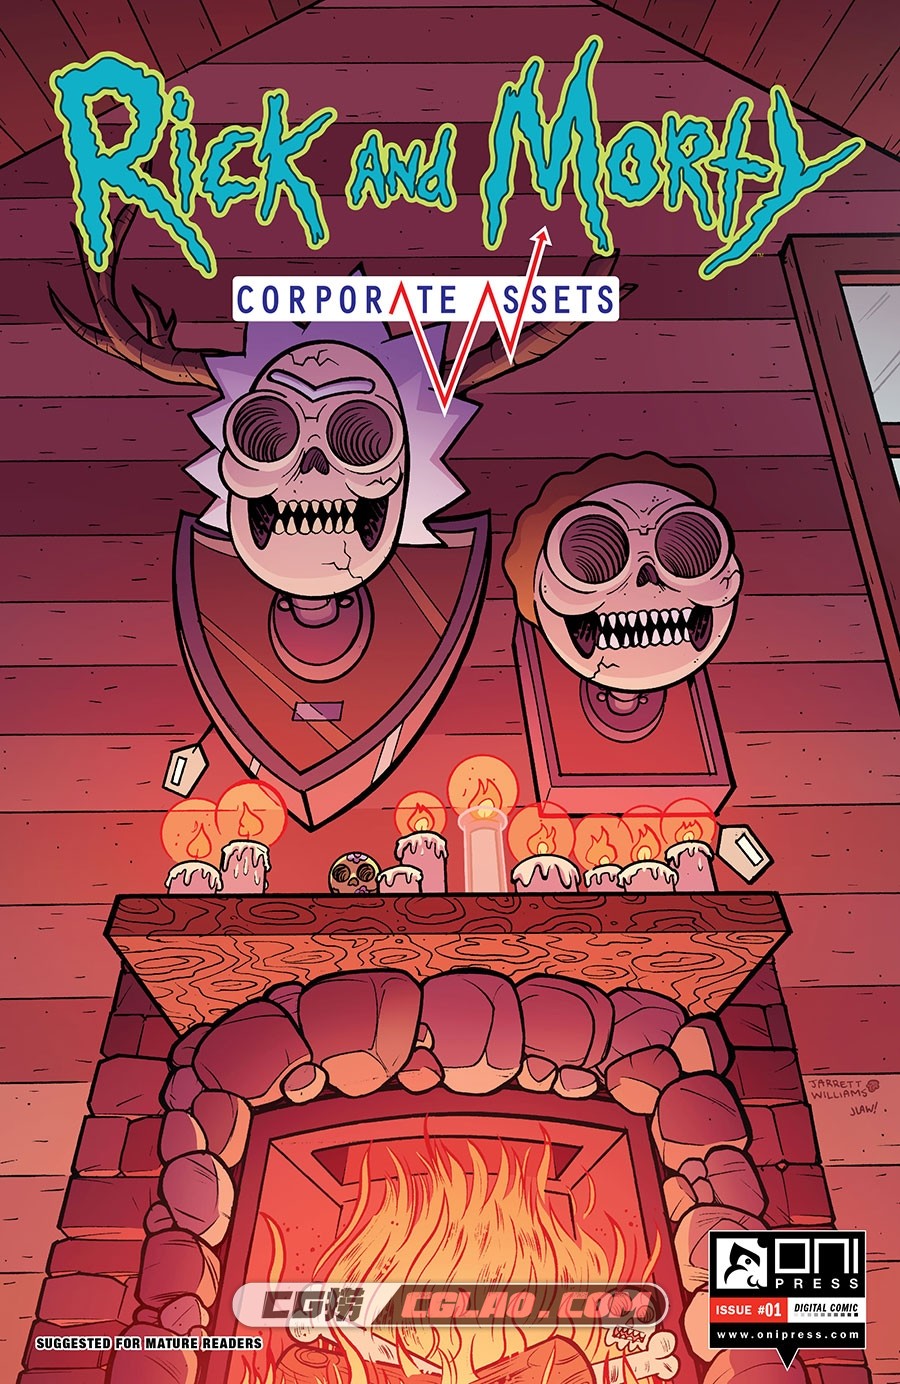 Rick and Morty Infinity Hour 001 (2022）漫画 百度网盘下载,Rick-and-Morty---Corporate-Assets-001-000.jpg